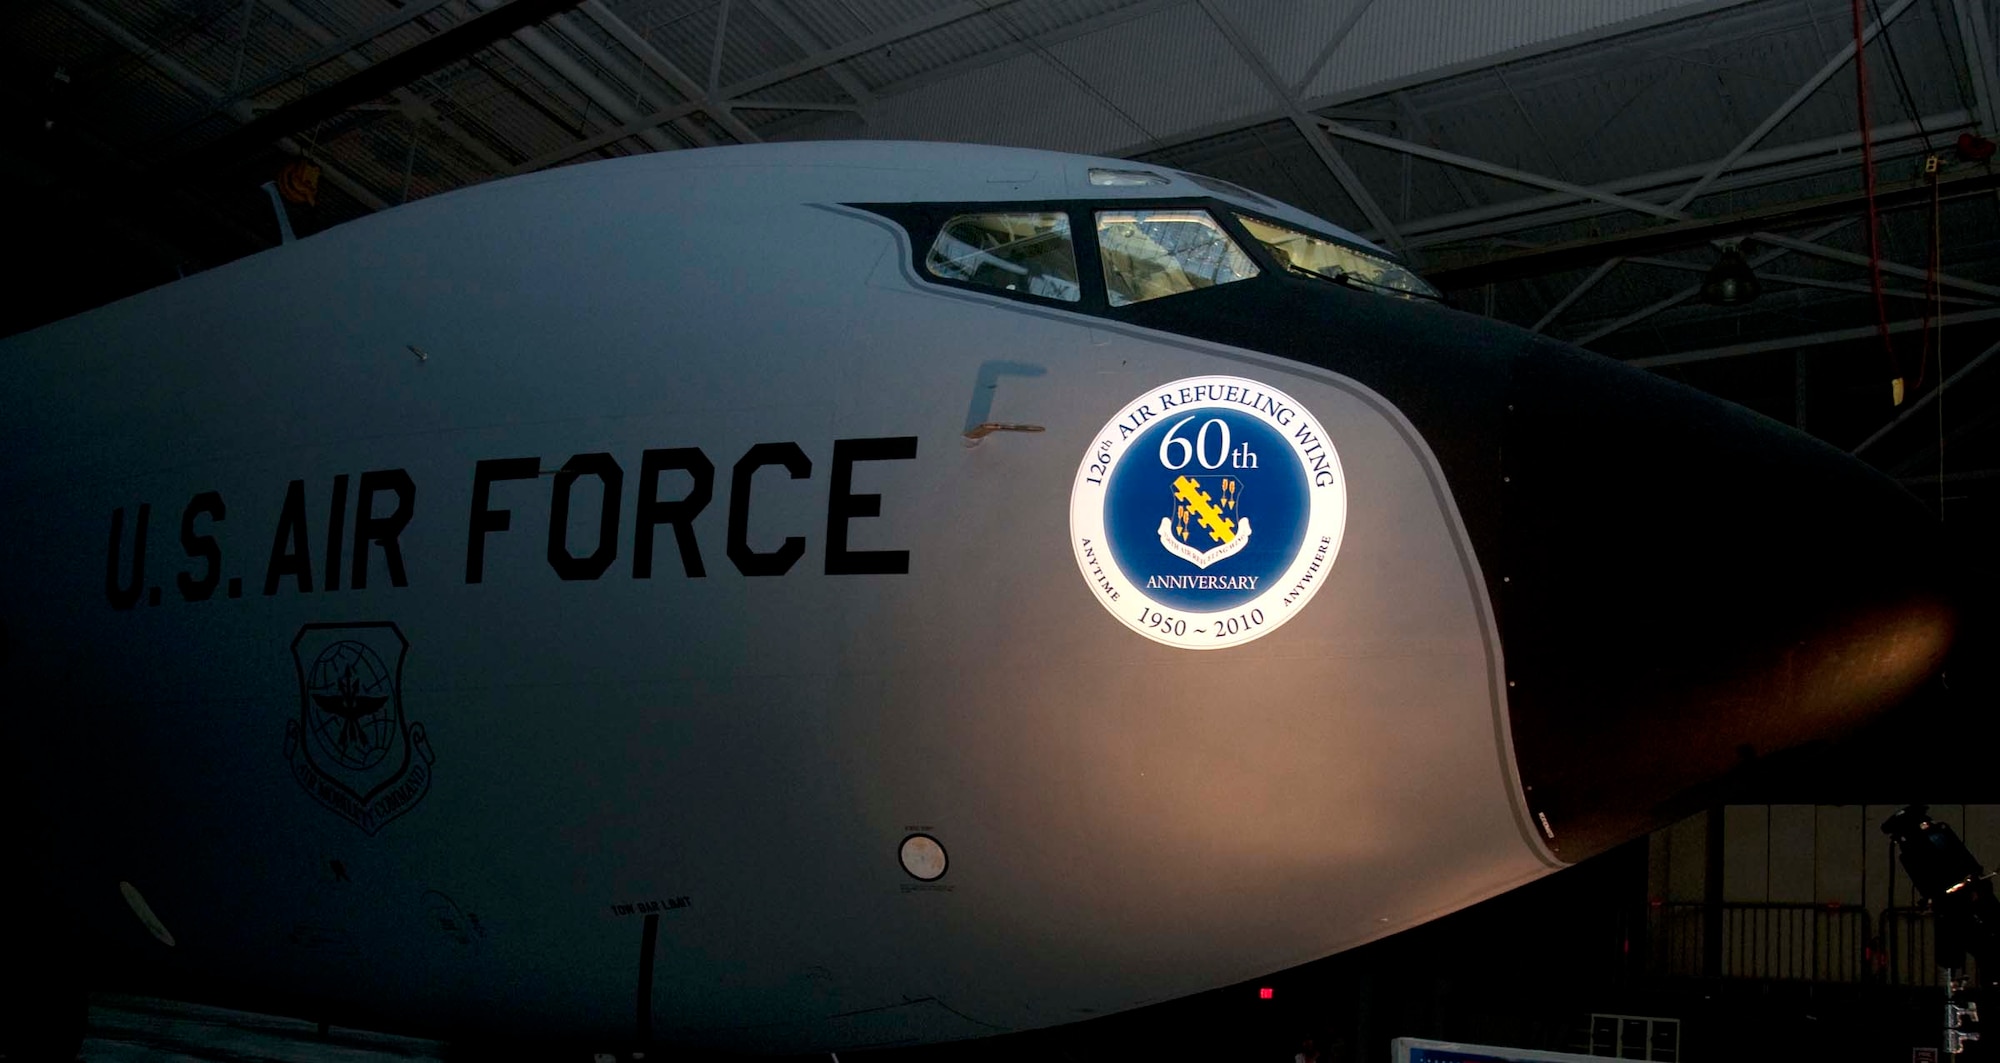 The KC- 135 Stratotanker is a premier asset to the U.S. Air Force and other military branches.  The Stratotanker provides aerial refueling support to Air Force, Navy and Marine Corp aircraft as well as allied nations.  The KC-135 also transports cargo as well as litter and ambulatory patients. (Photo by Pfc. Jason Northcutt, 139th Mobile Public Affairs Detachment)